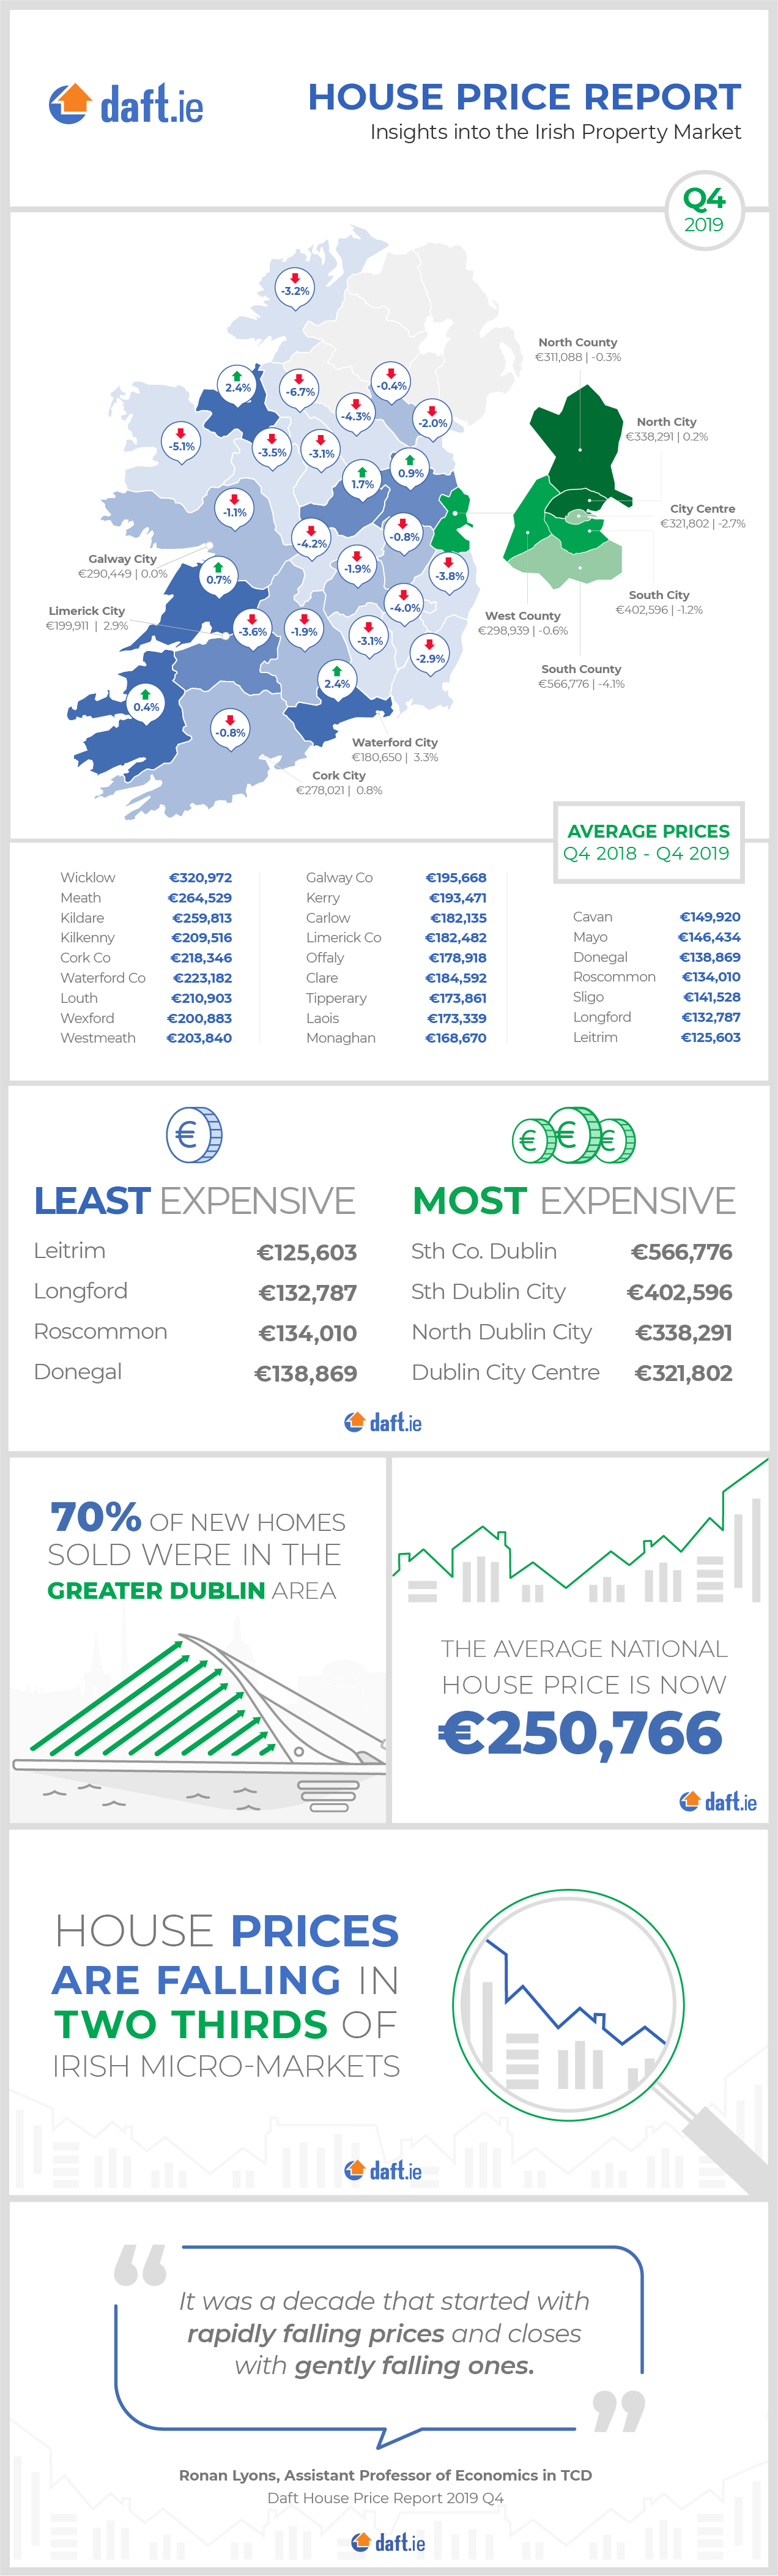 Daft.ie House Price Report: Q4 2019 Infographic